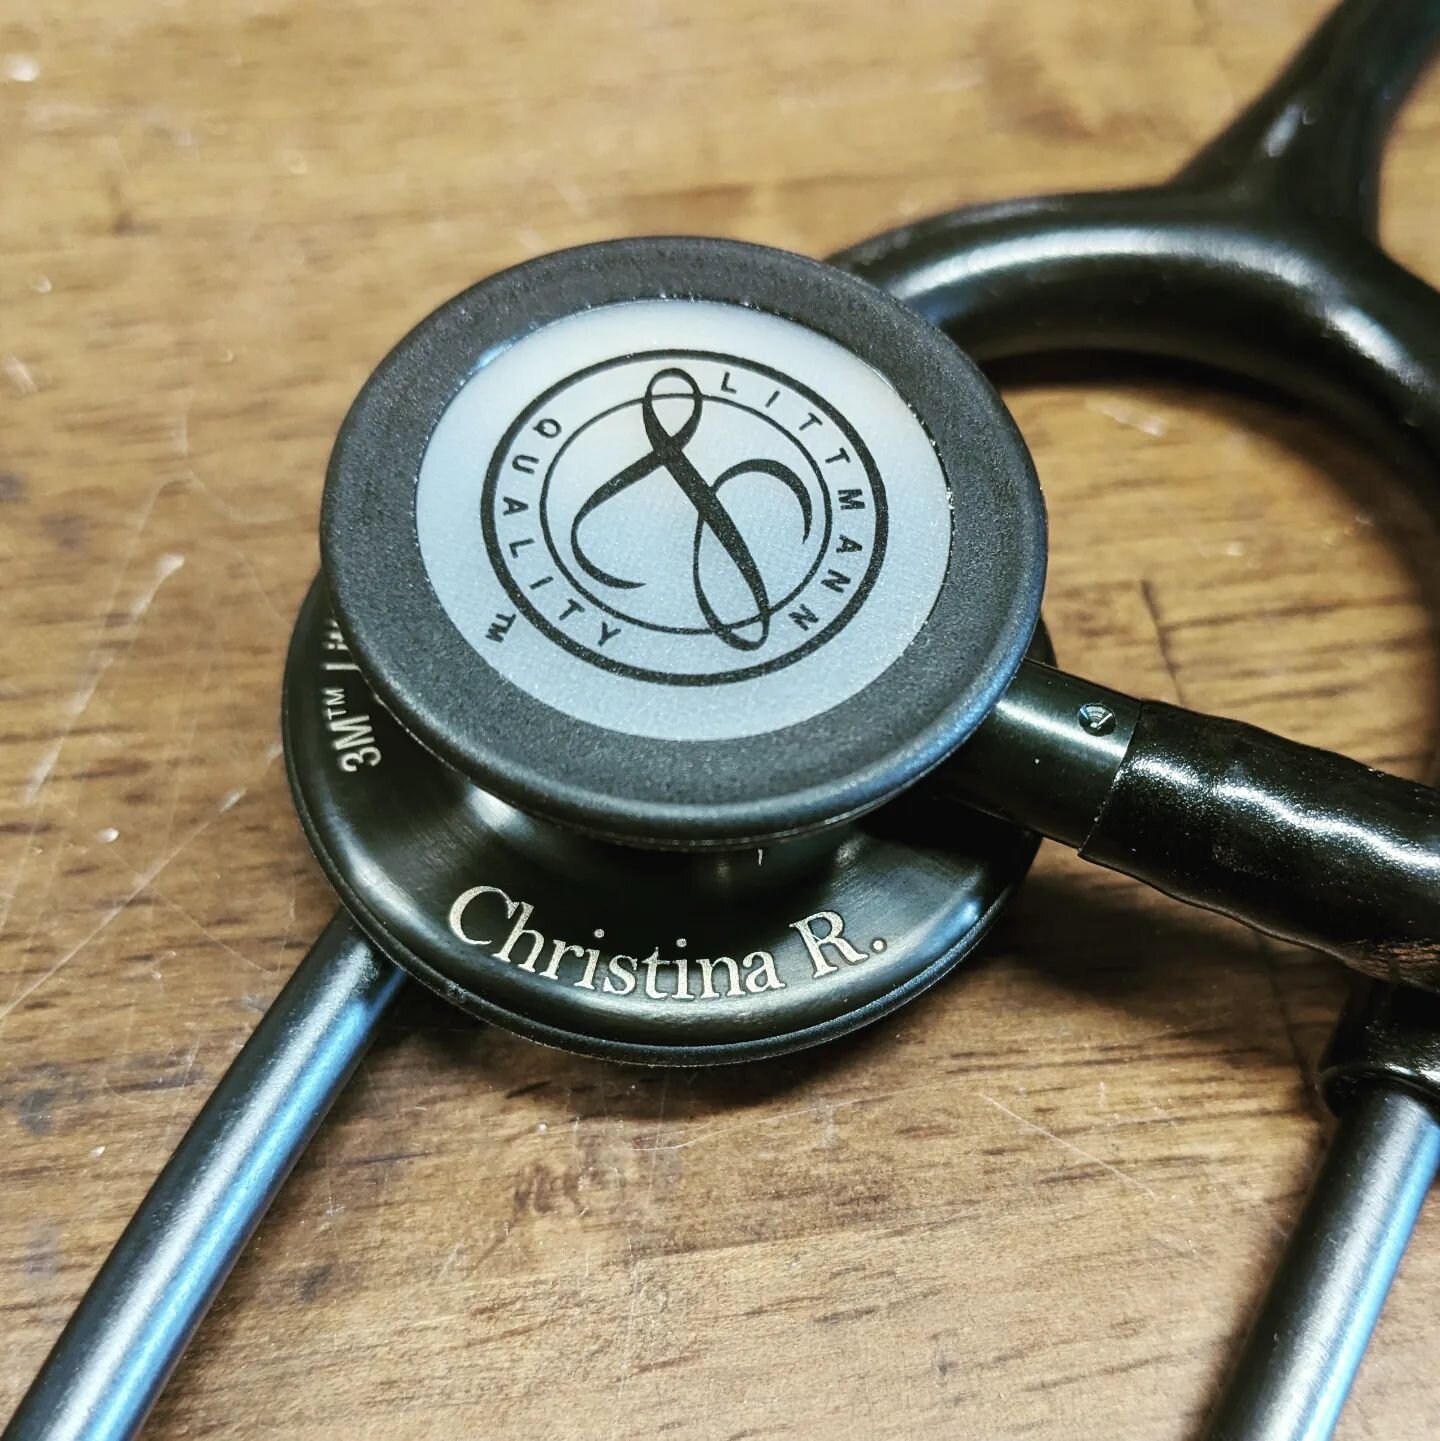 Congrats to @chrsrchrd on starting clinicals, hopefully no one mistakes your stethoscope for theirs now!
&middot;
&middot;
&middot;
#laserengraving #laserengraved #laserengrave #laseretch #laseretching #laseretched #blackmountainmarking #customengrav